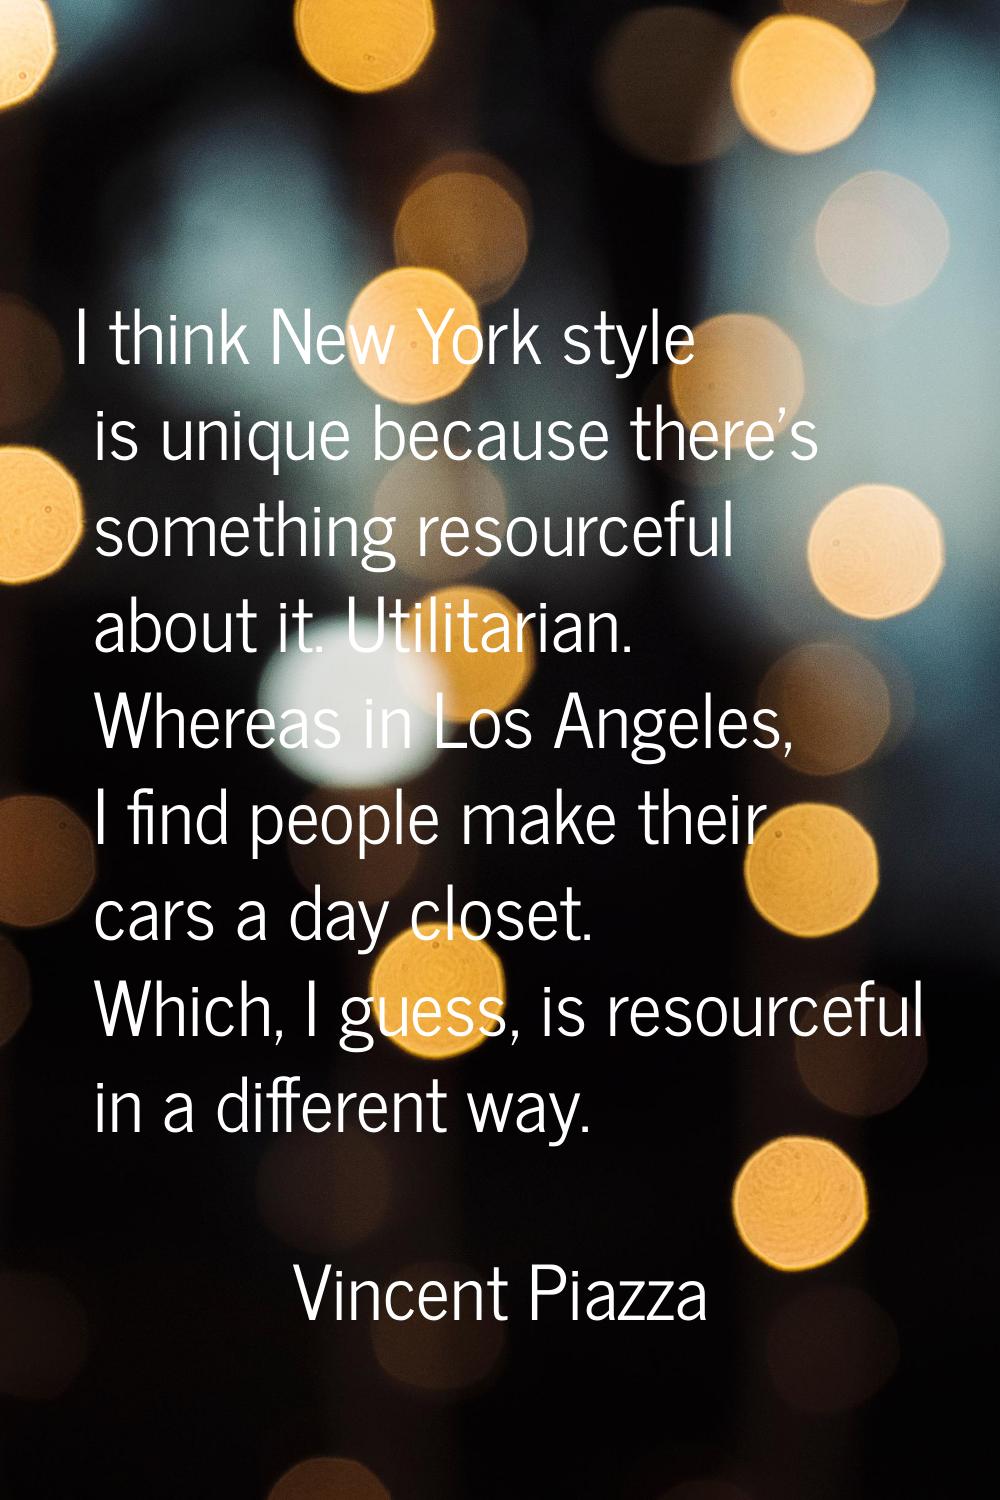 I think New York style is unique because there's something resourceful about it. Utilitarian. Where